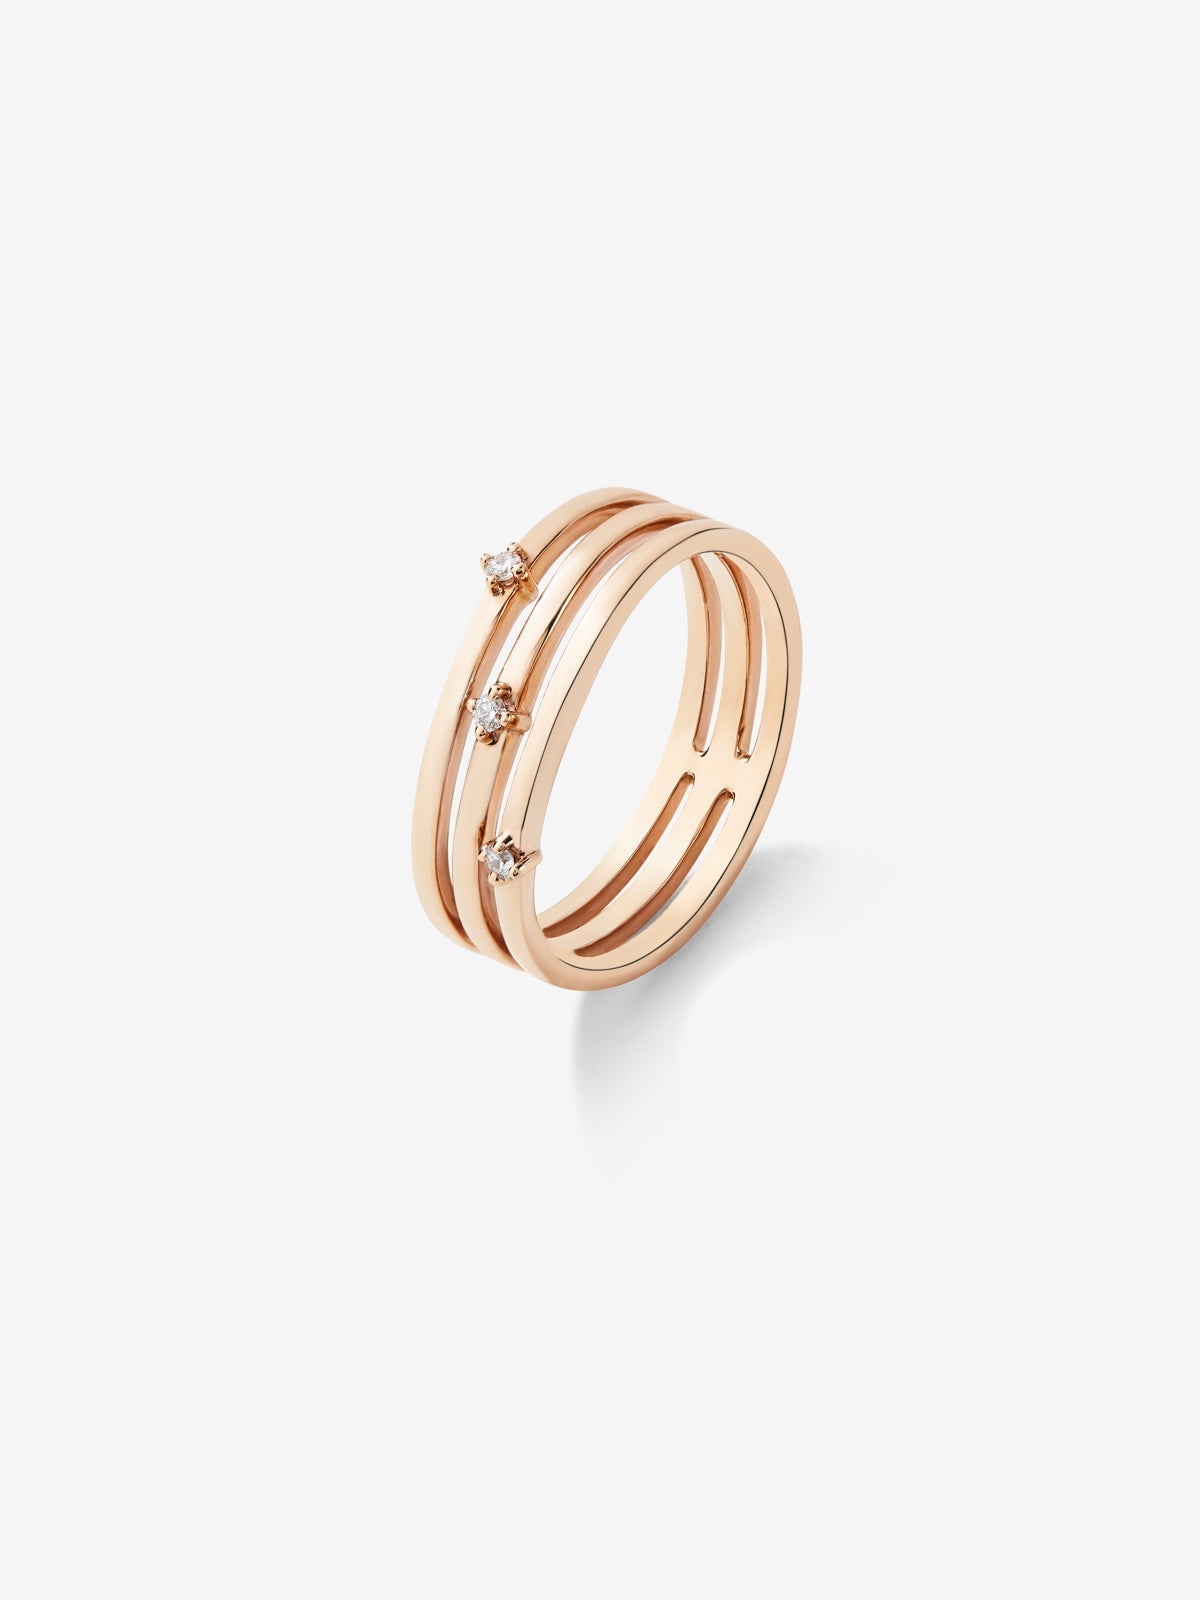 18K Rose Gold Triple Arm Ring with Diamonds